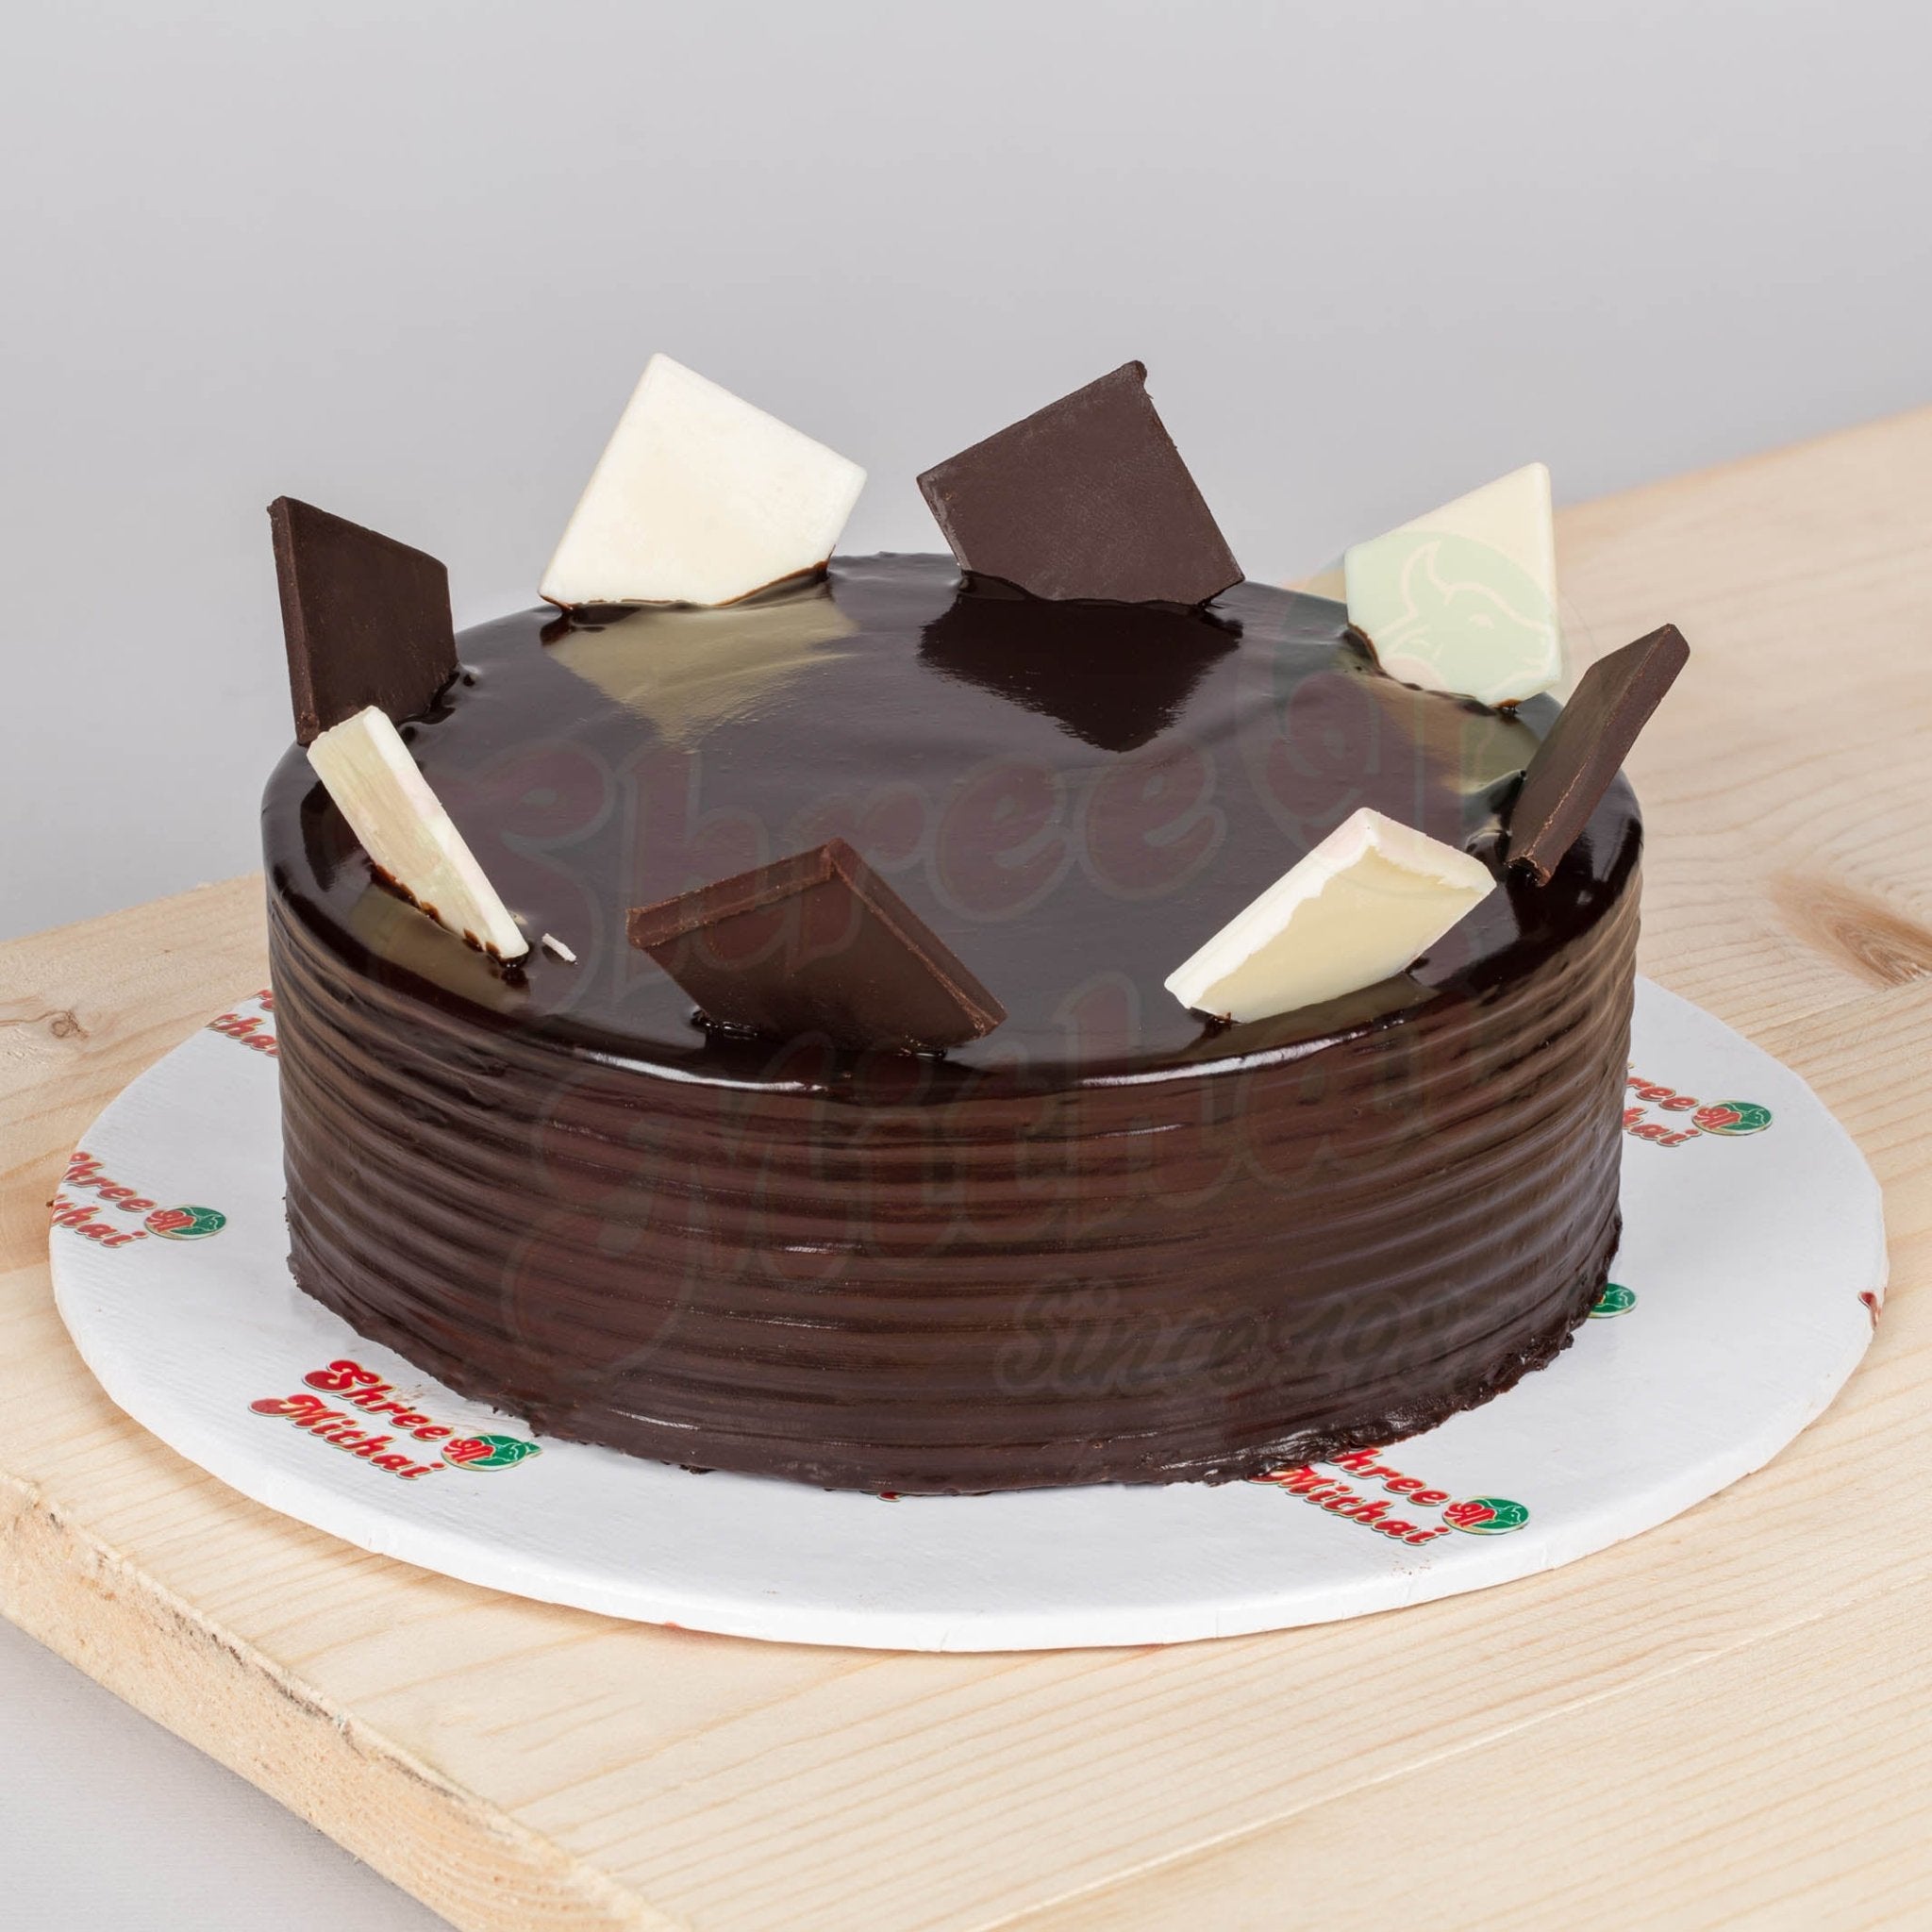 Send Cakes to USA Today With the Fastest Delivery Service